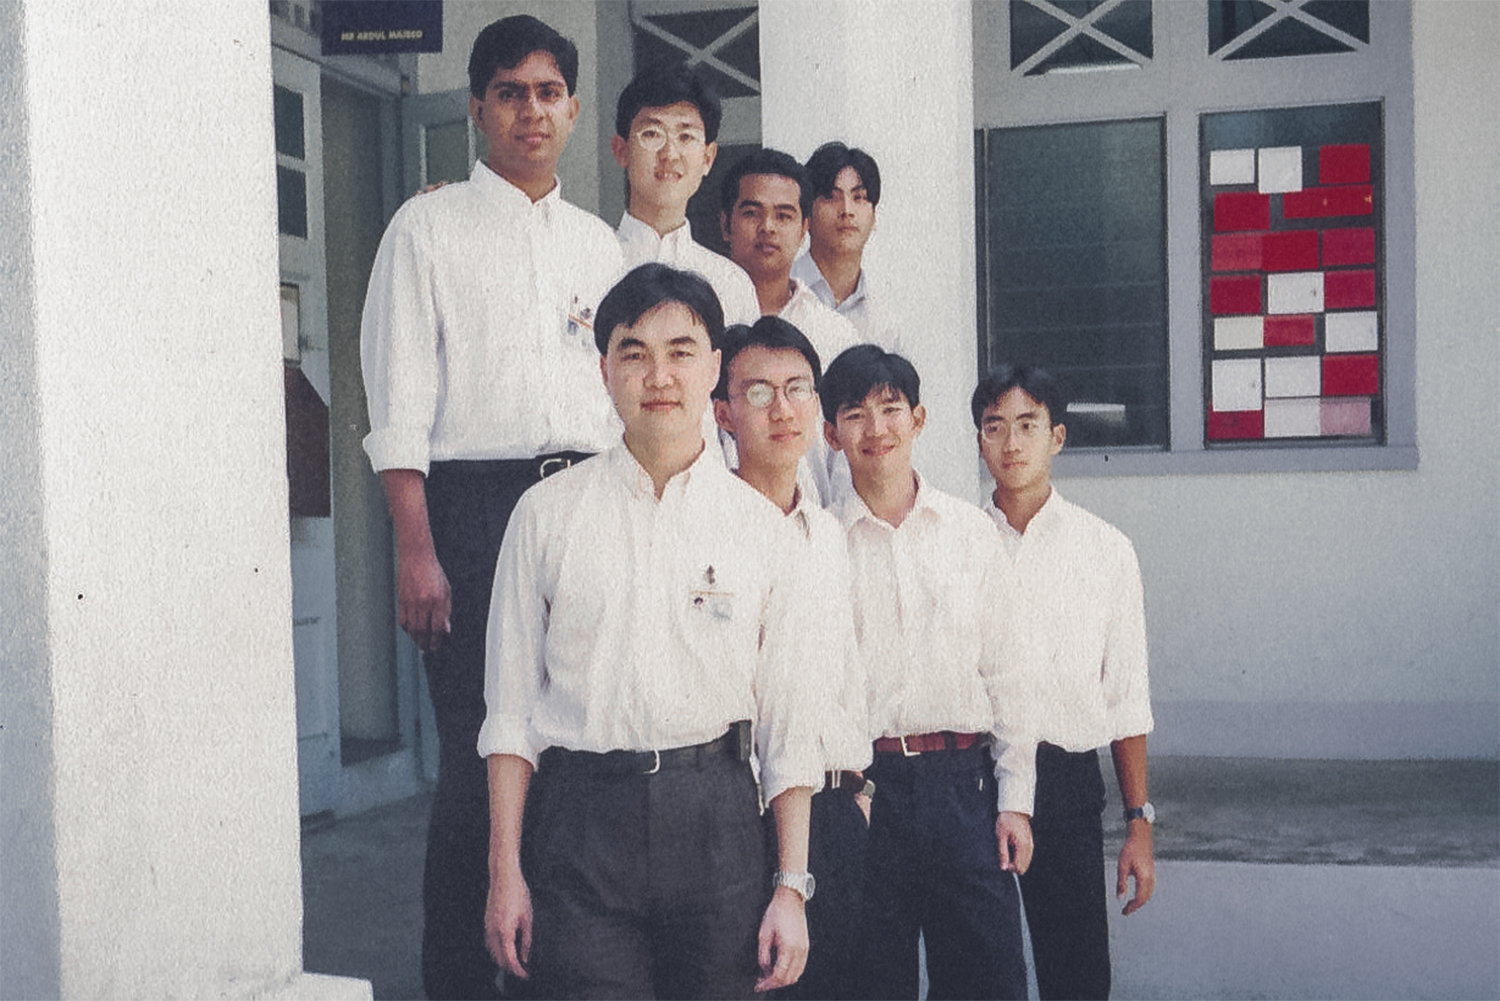 The pioneering officers of the PPU stand in a line, looking at the camera proudly. The PPU was set up on 1 March 1996.